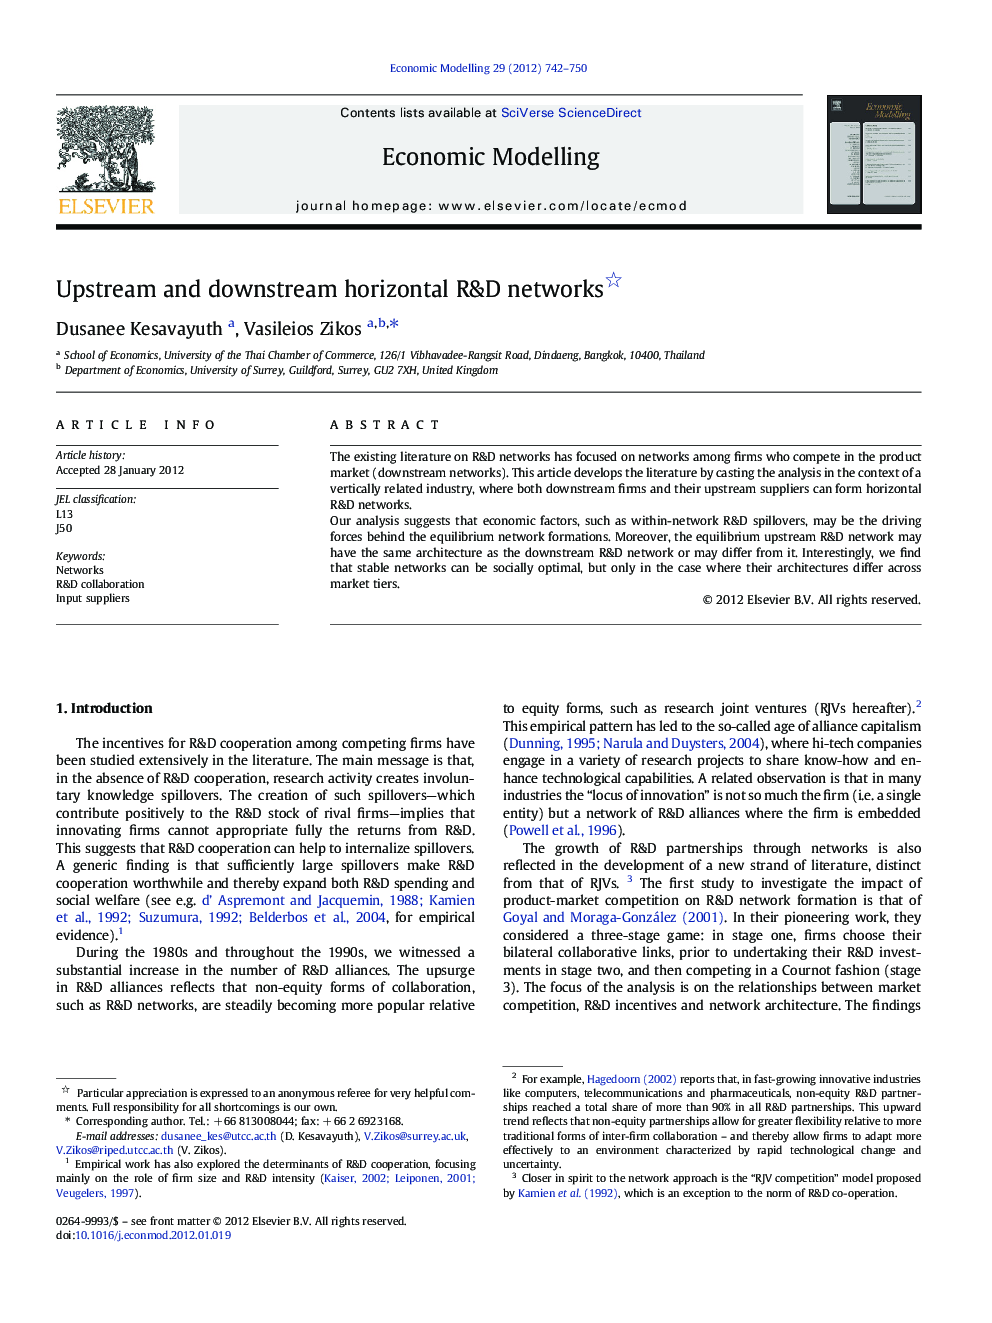 Upstream and downstream horizontal R&D networks